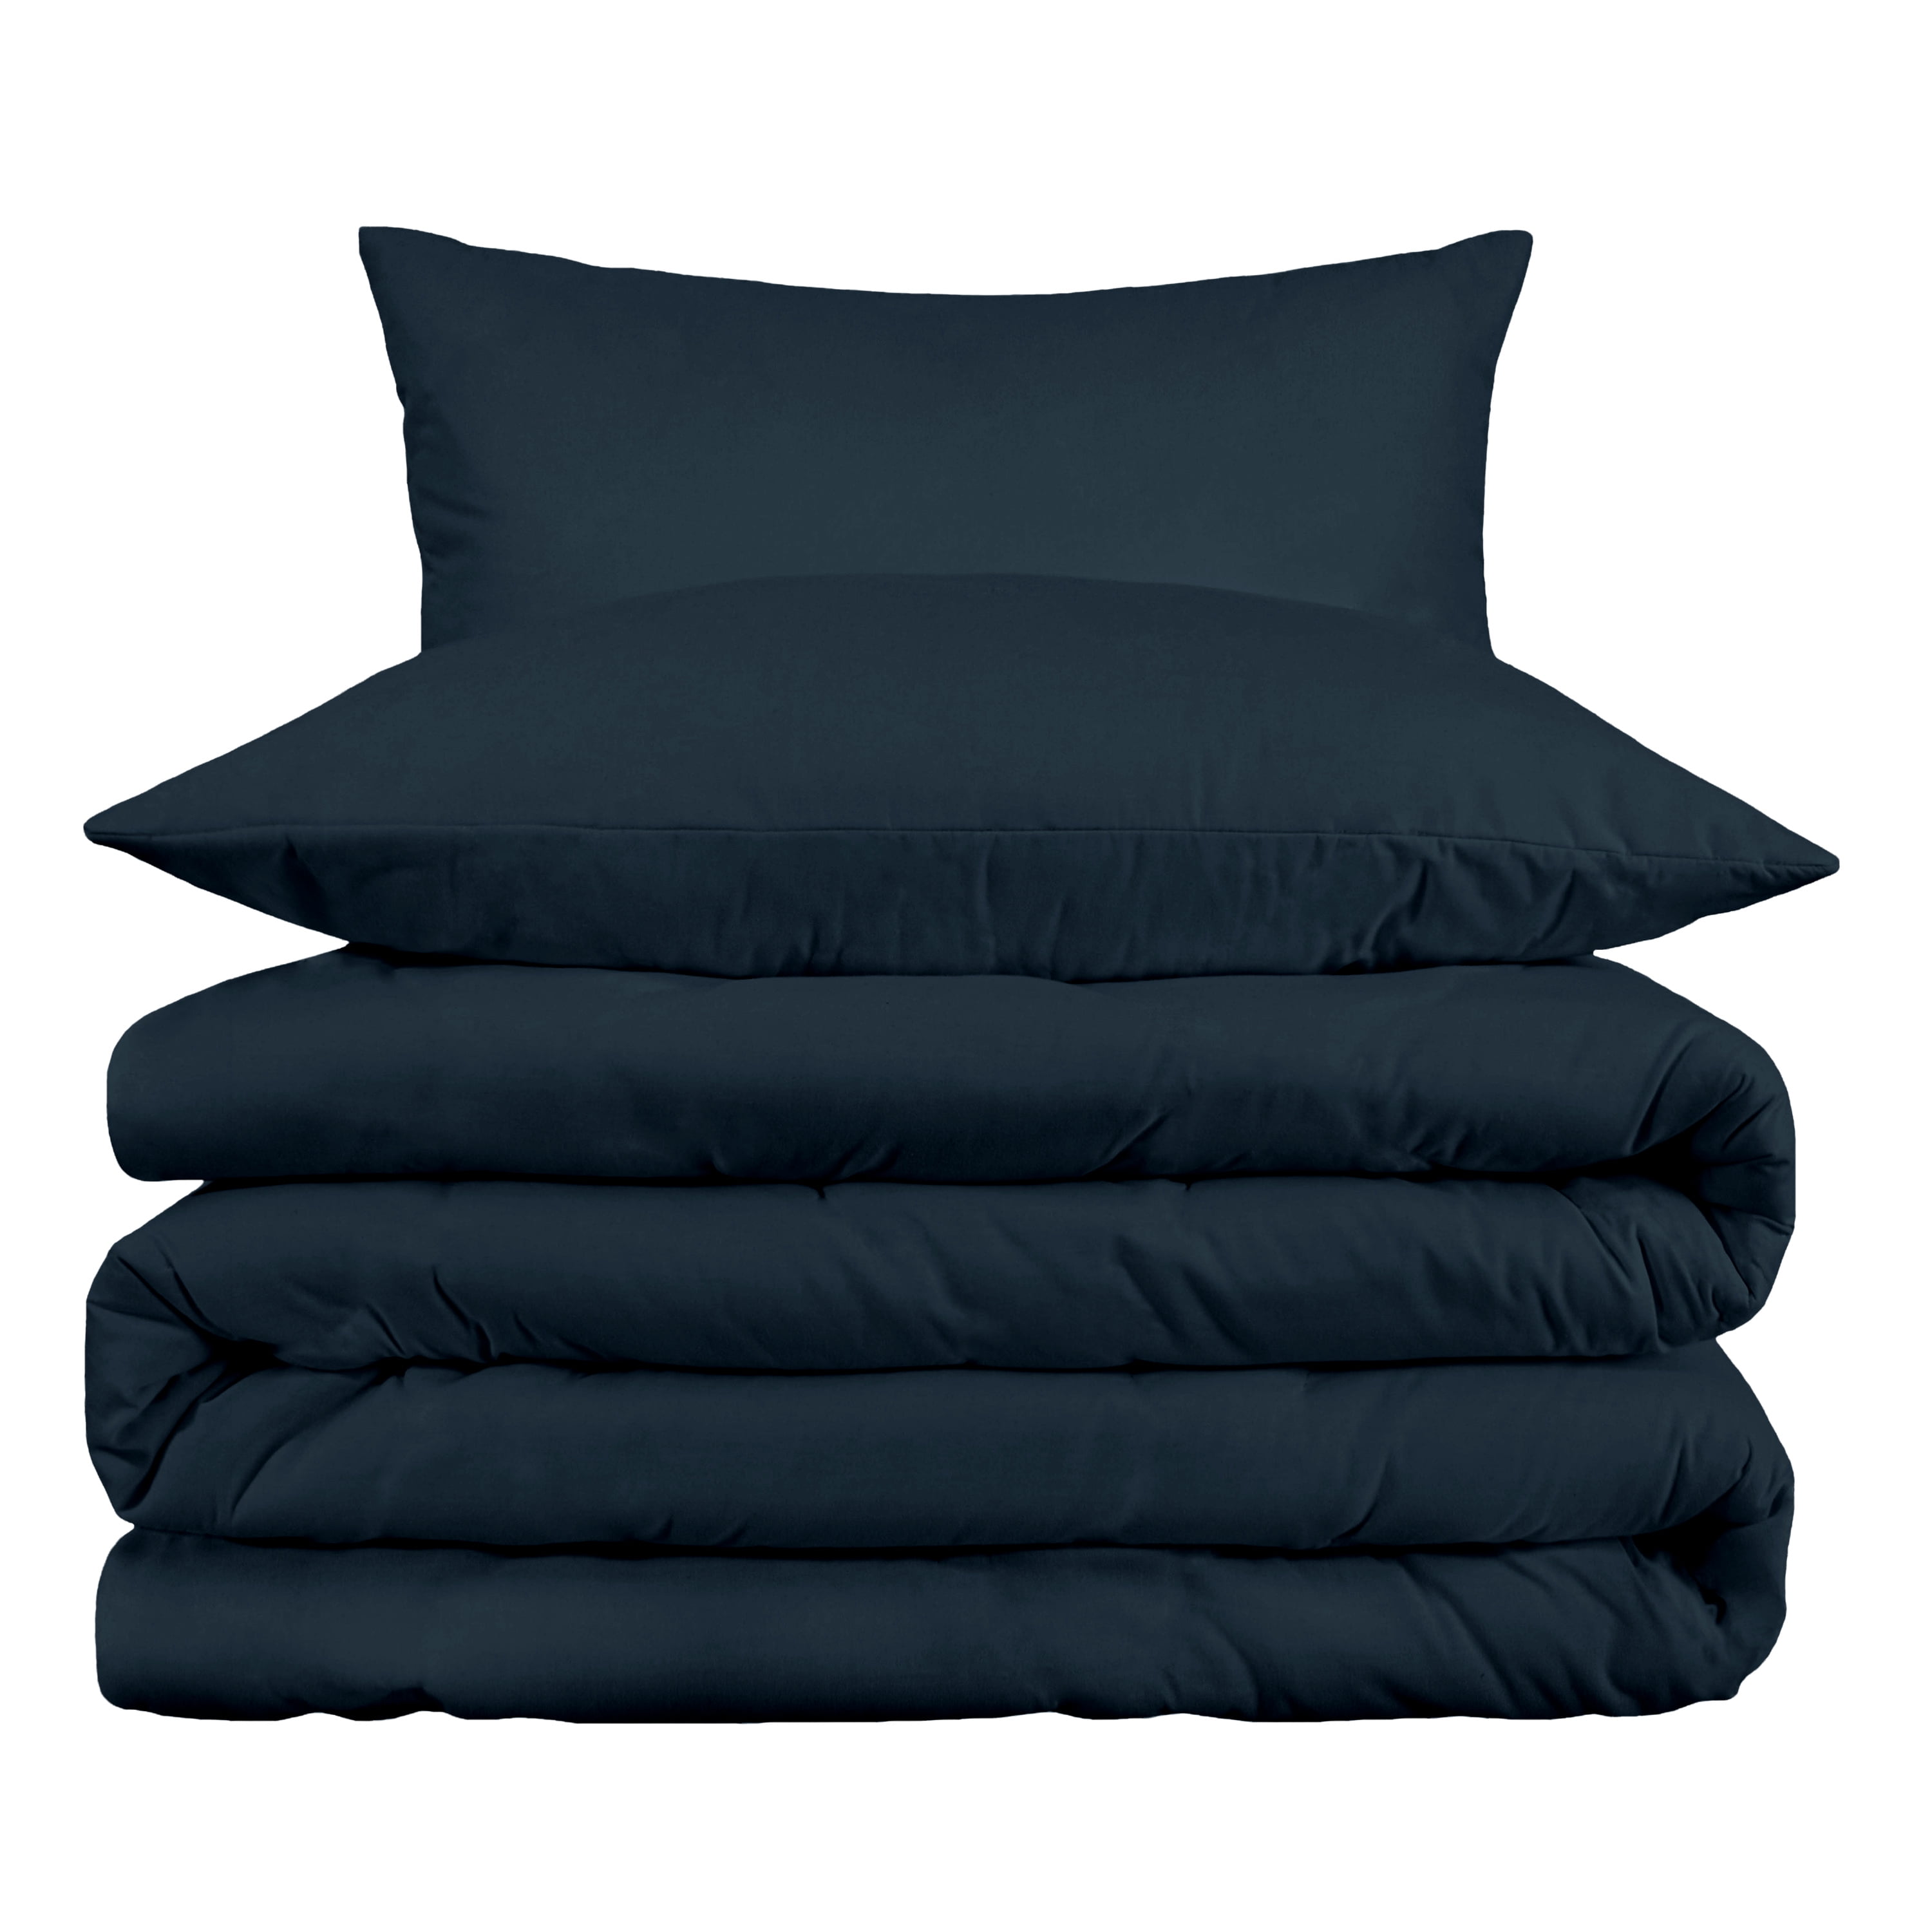 Black Marseille Single Quilt Set with Coordinating Pillows 